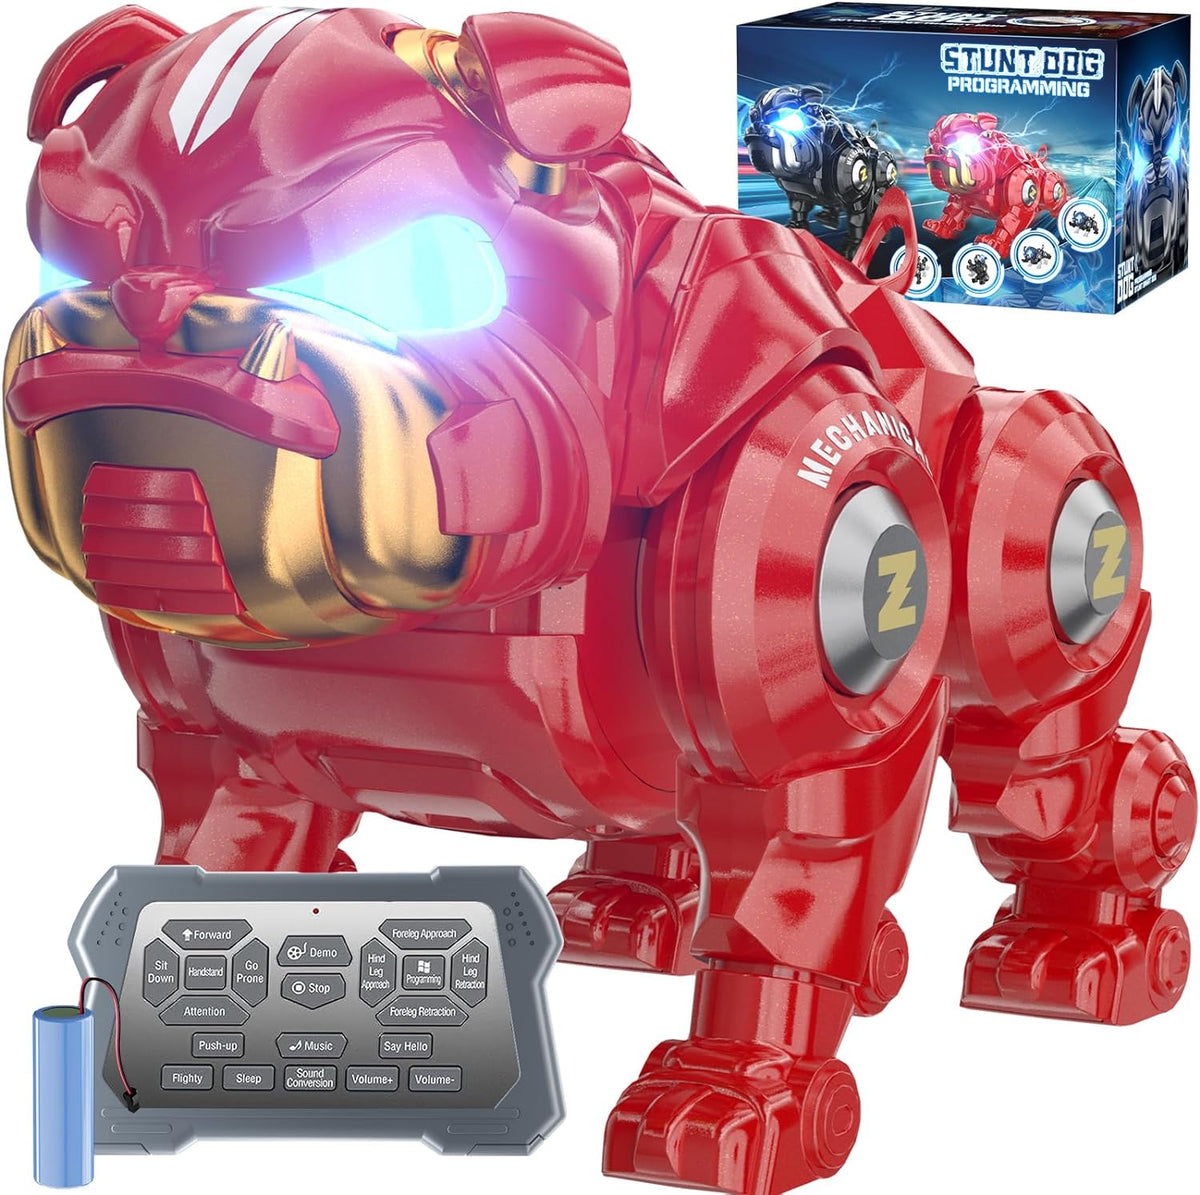 Blkont Remote Control Robot Dog Toys for Boys, Rechargeable Programmable Stunt Robot Dog with Singing, Dancing and Touch Functions for Boys Ages 3 4 5 6 7 8 9 10+ Christmas & Birthday Gifts (Black) - Cykapu